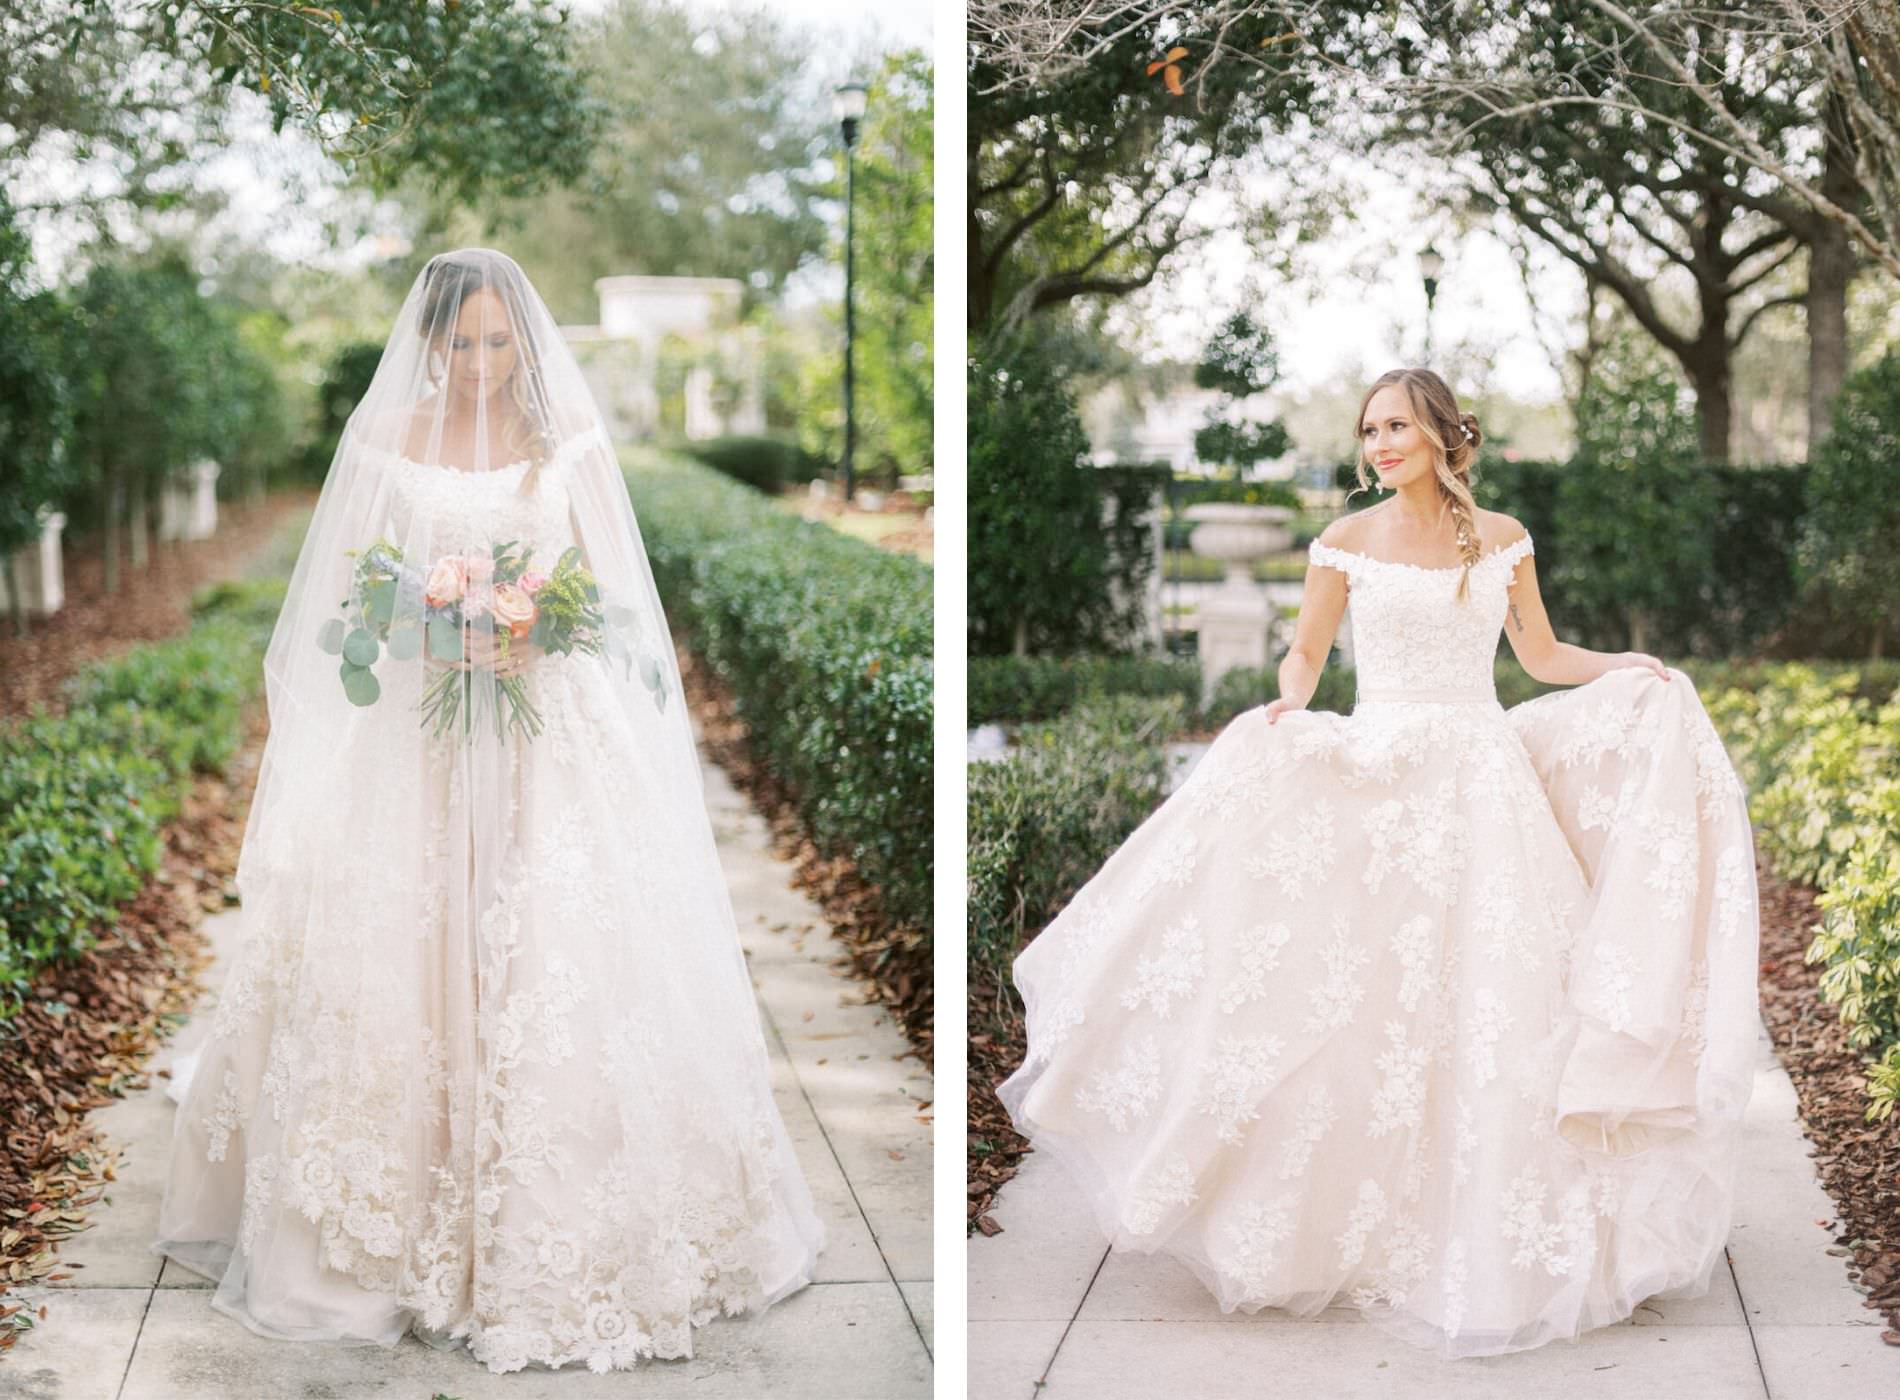 Outdoor Garden Bridal Portraits | Champagne and Ivory Lace Ball Gown Off the Shoulder Wedding Dress with Cathedral Veil | Sarasota Wedding Dress Boutique Truly Forever Bridal